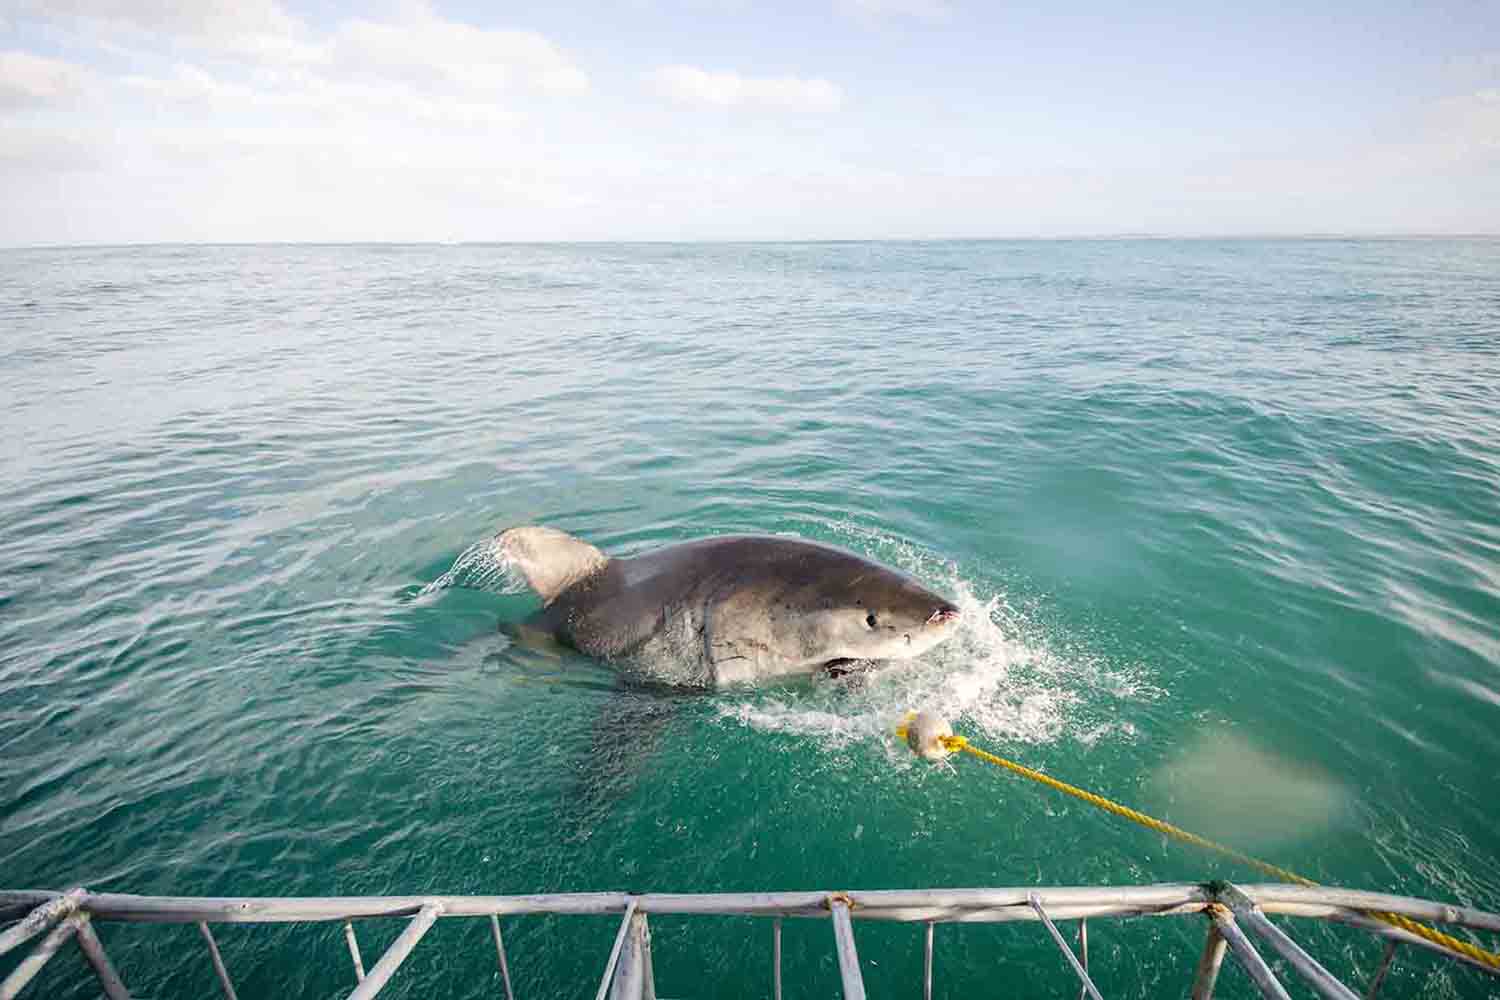 A great white shark attacking a bait ball just behind the cage